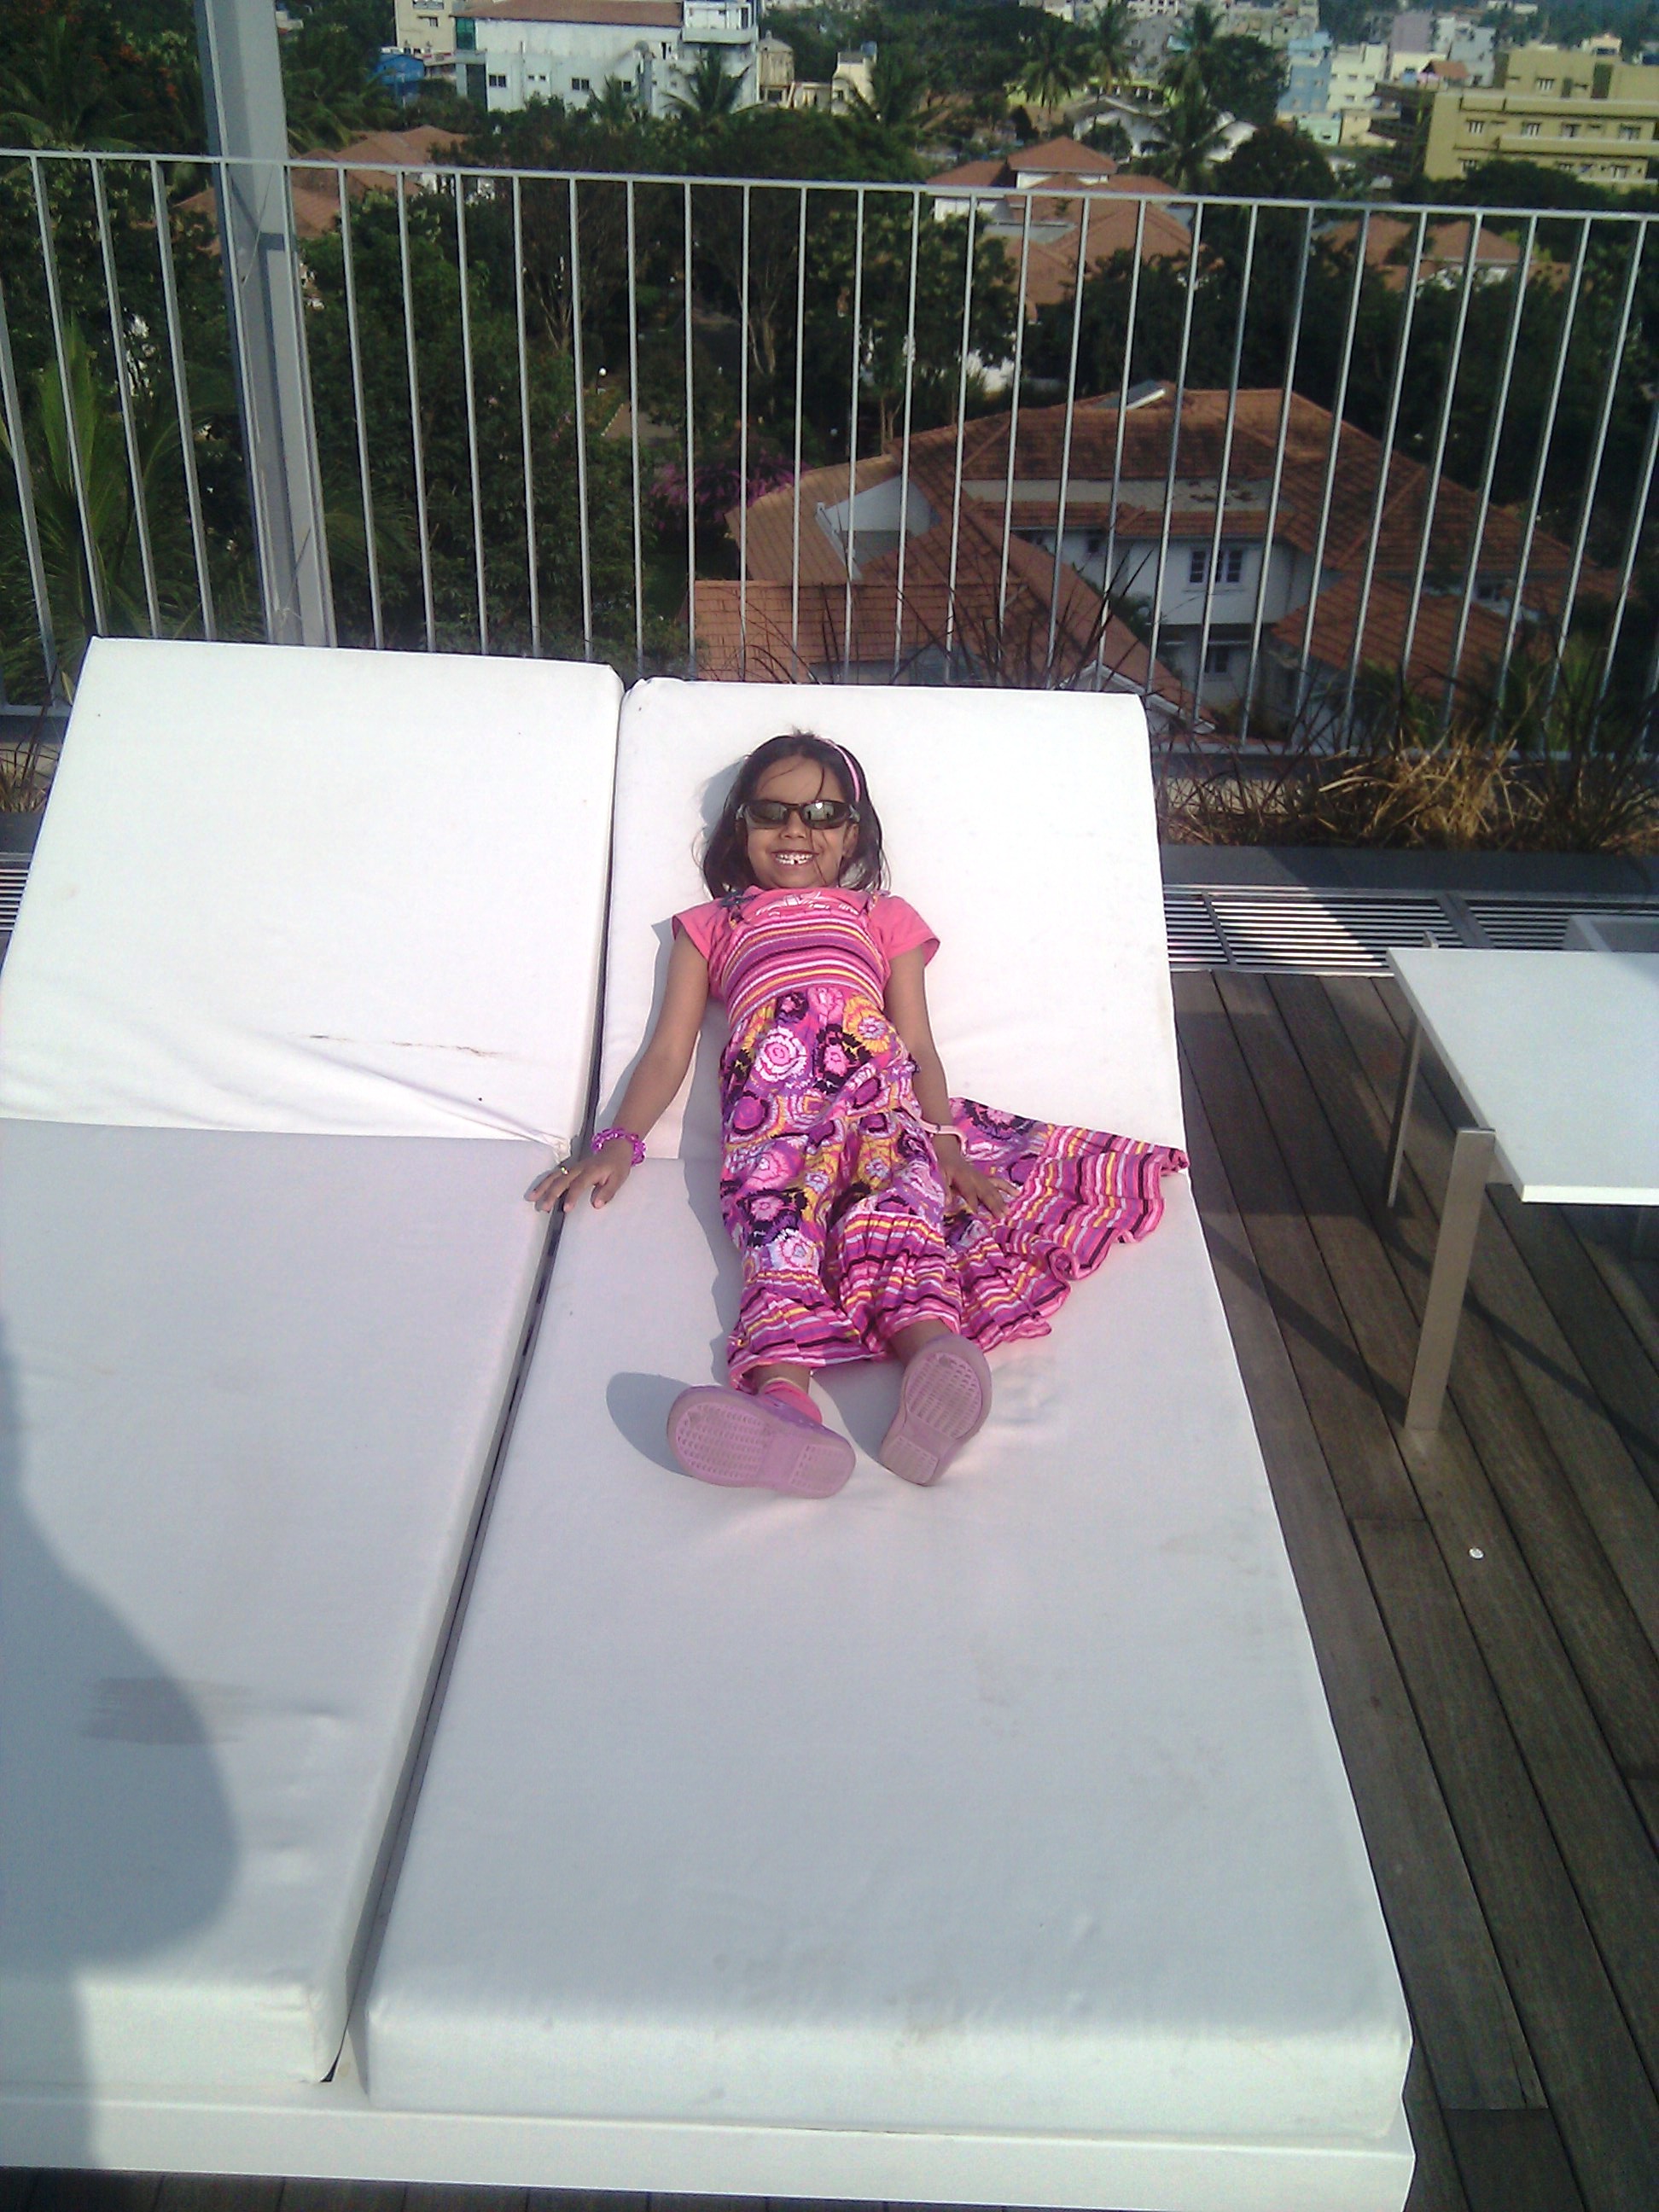 Lounging on the sunbeds